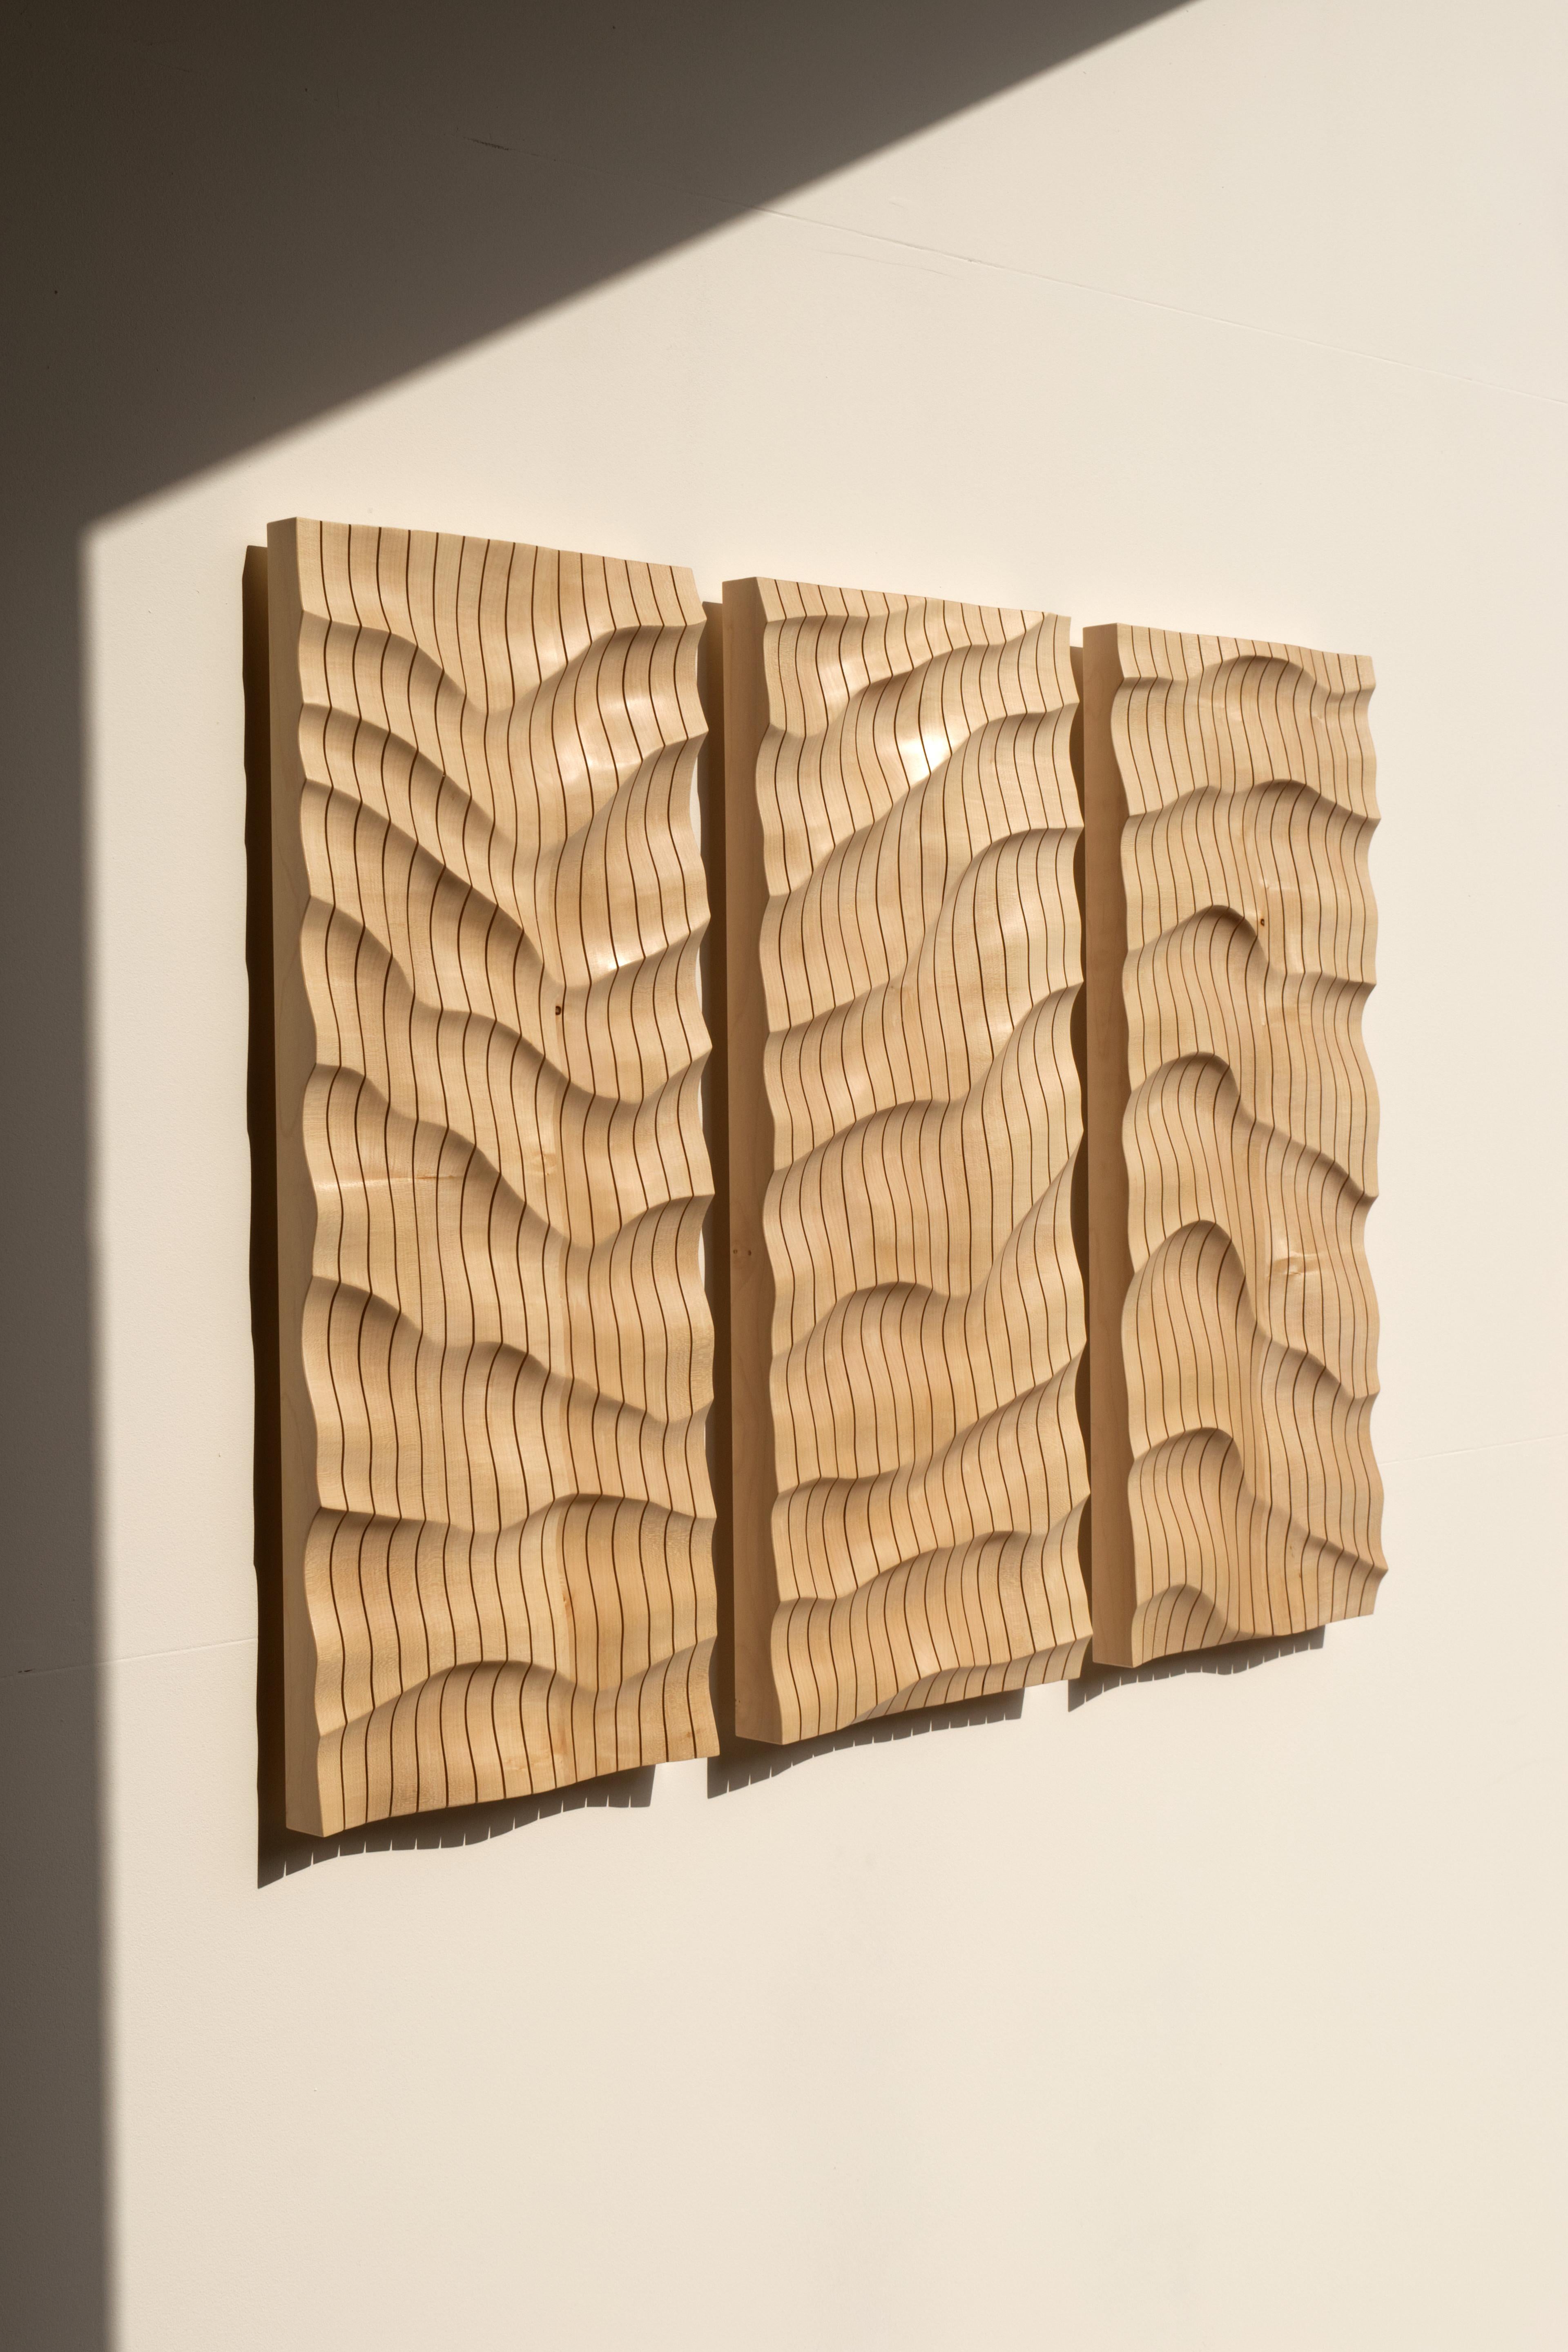 Triptych (abstract organic sculpture wall piece wood natural dynamic) - Sculpture by Gabriel Tarmassi